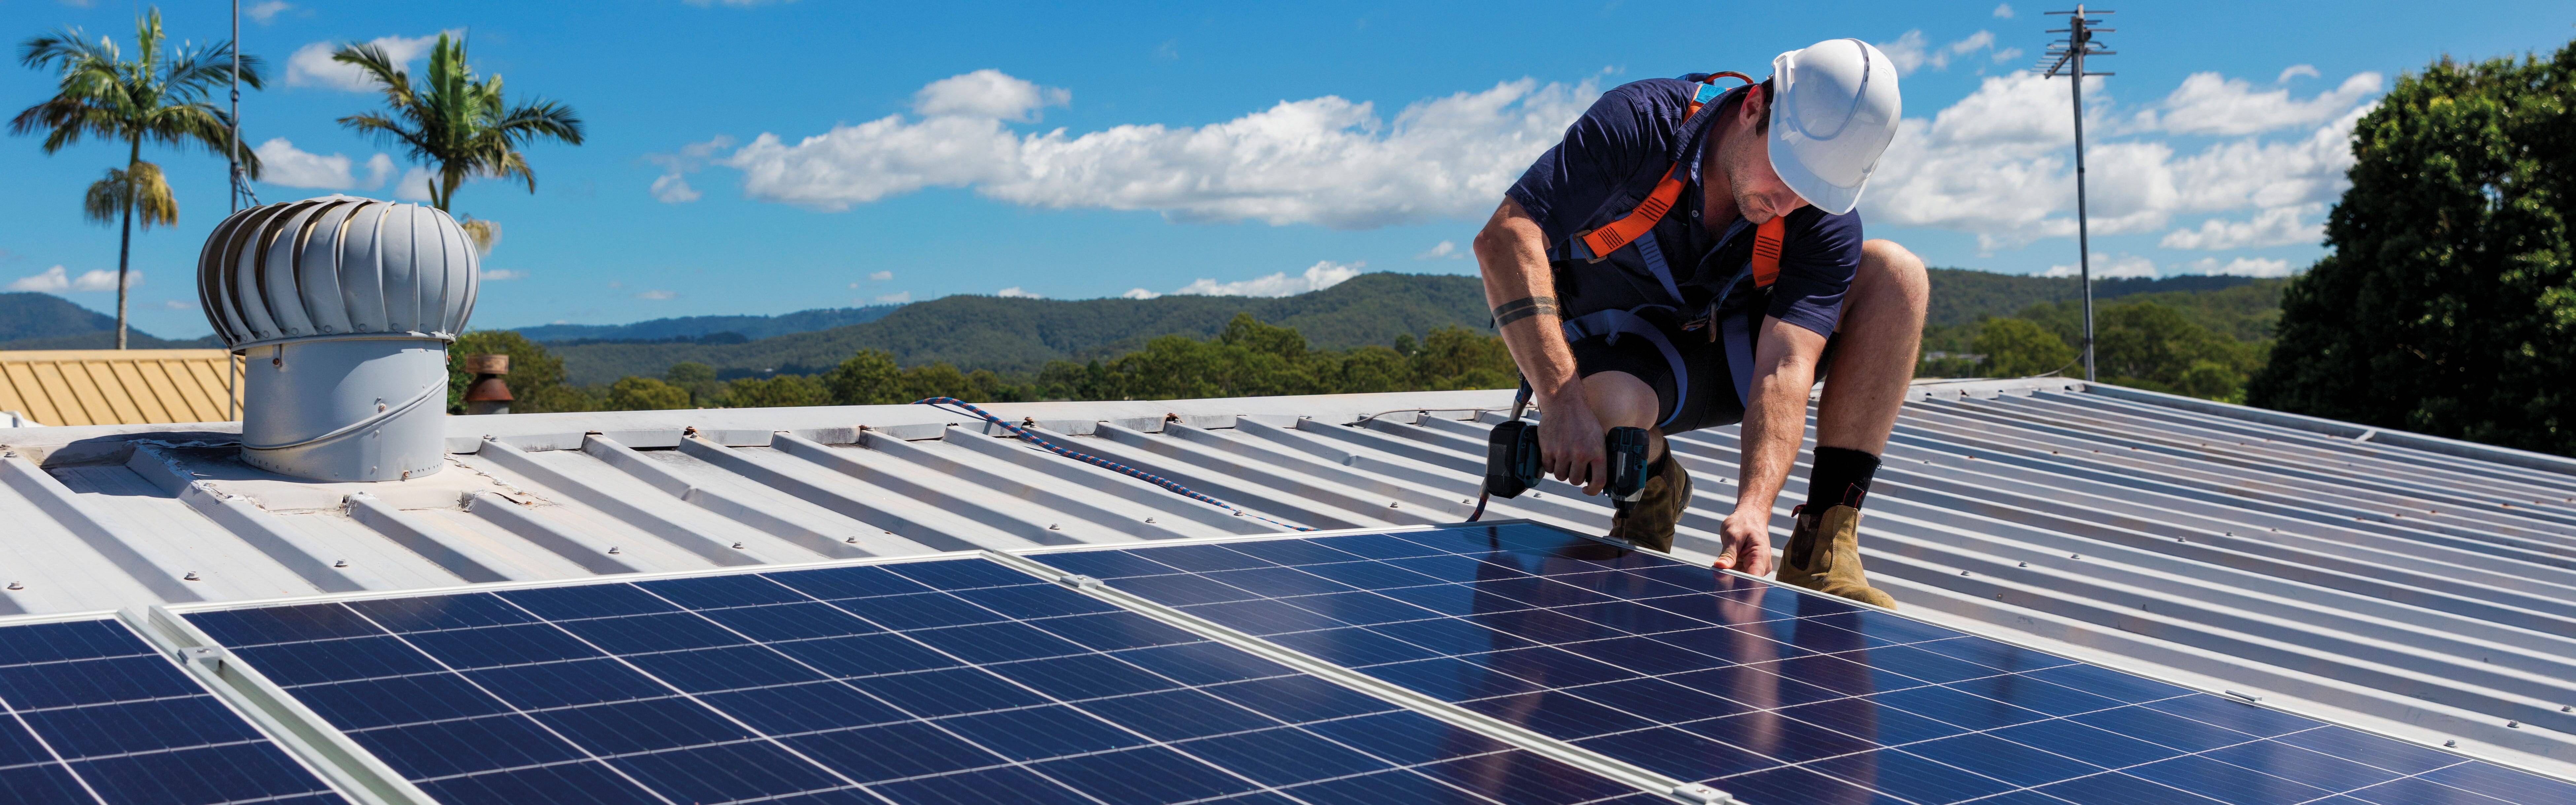 Affinity sets out second phase of solar ambition